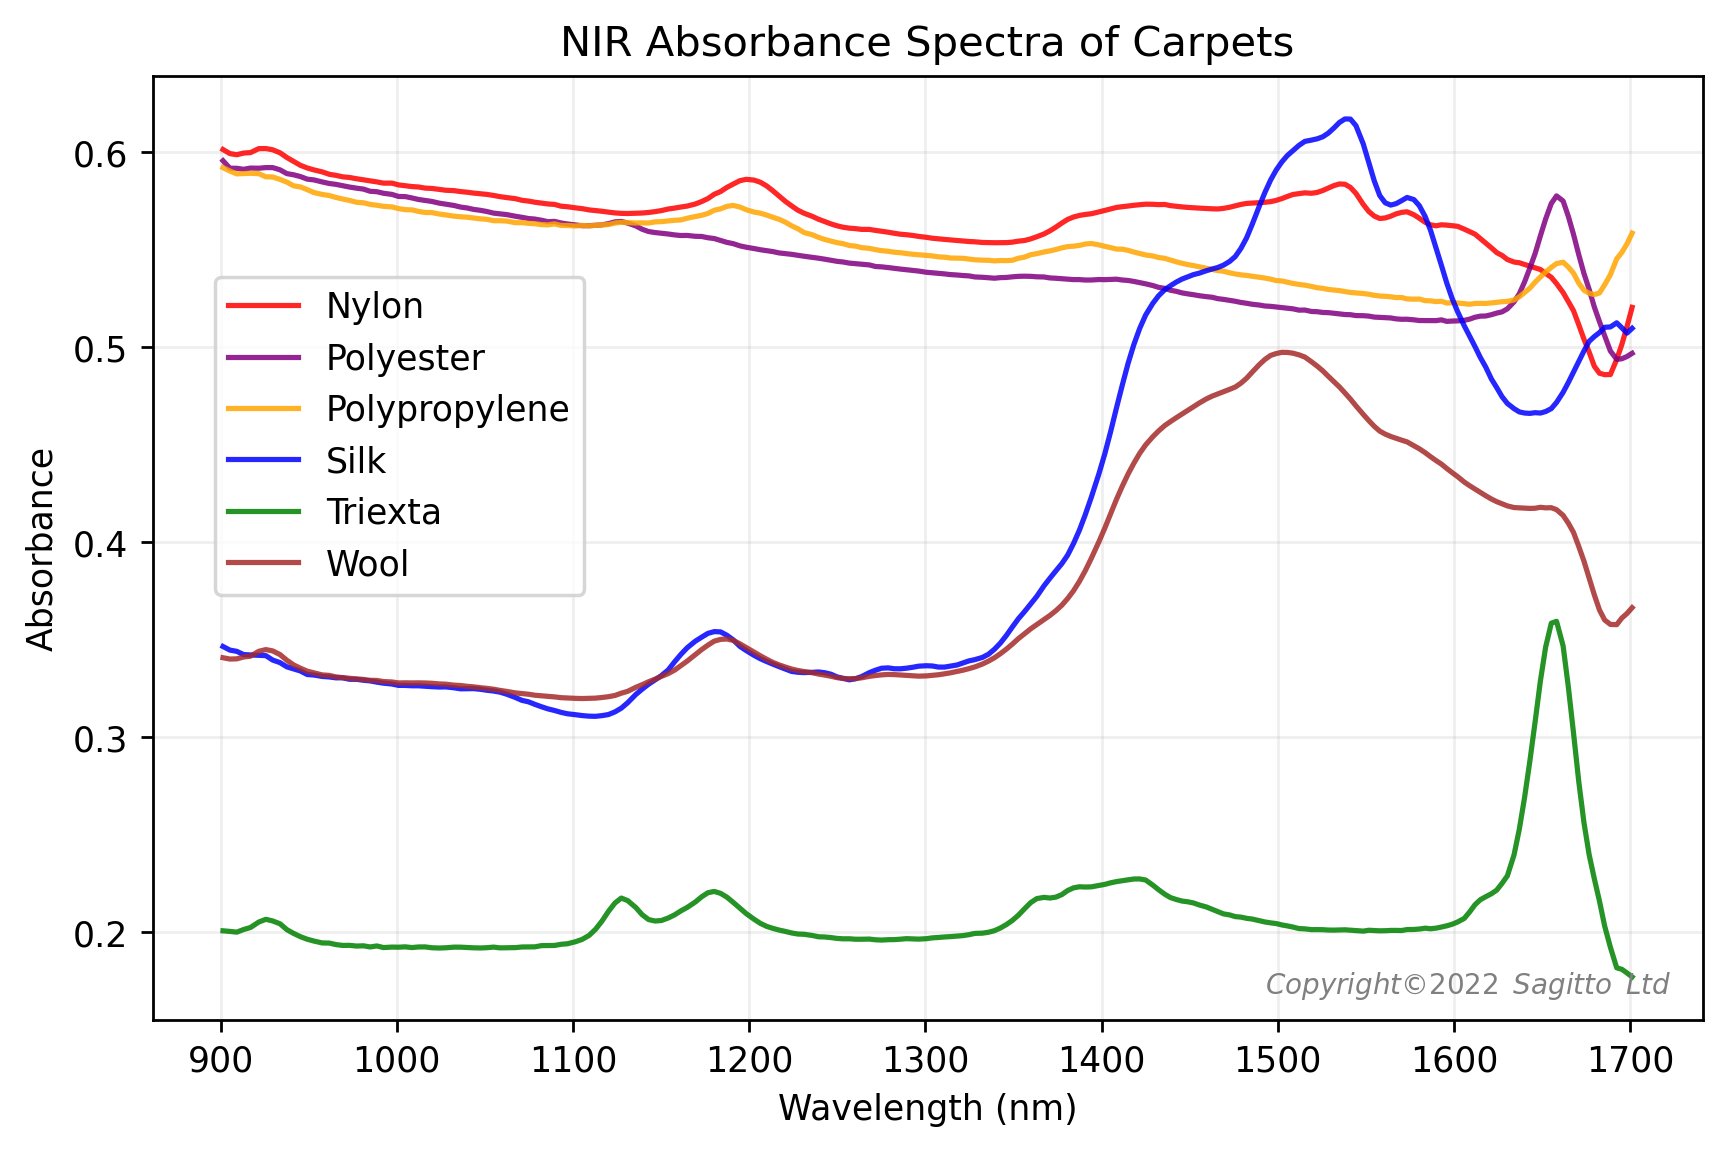 NIR is an excellent technique for identifying the composition of carpets.